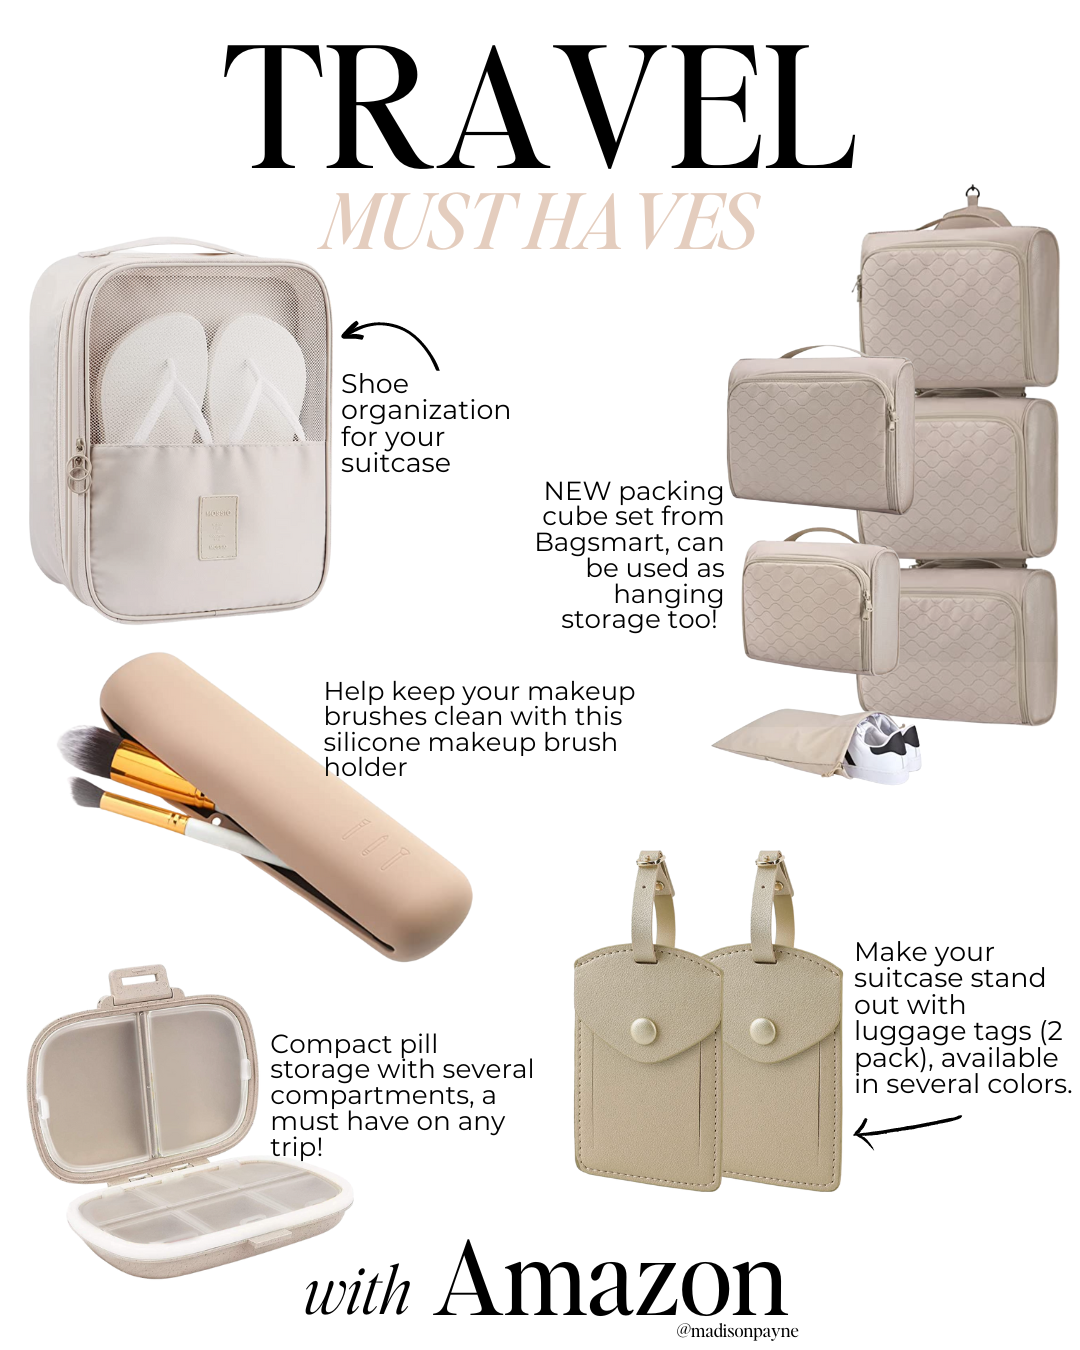 Top Travel Essentials  Must-Have Travel Accessories and Products